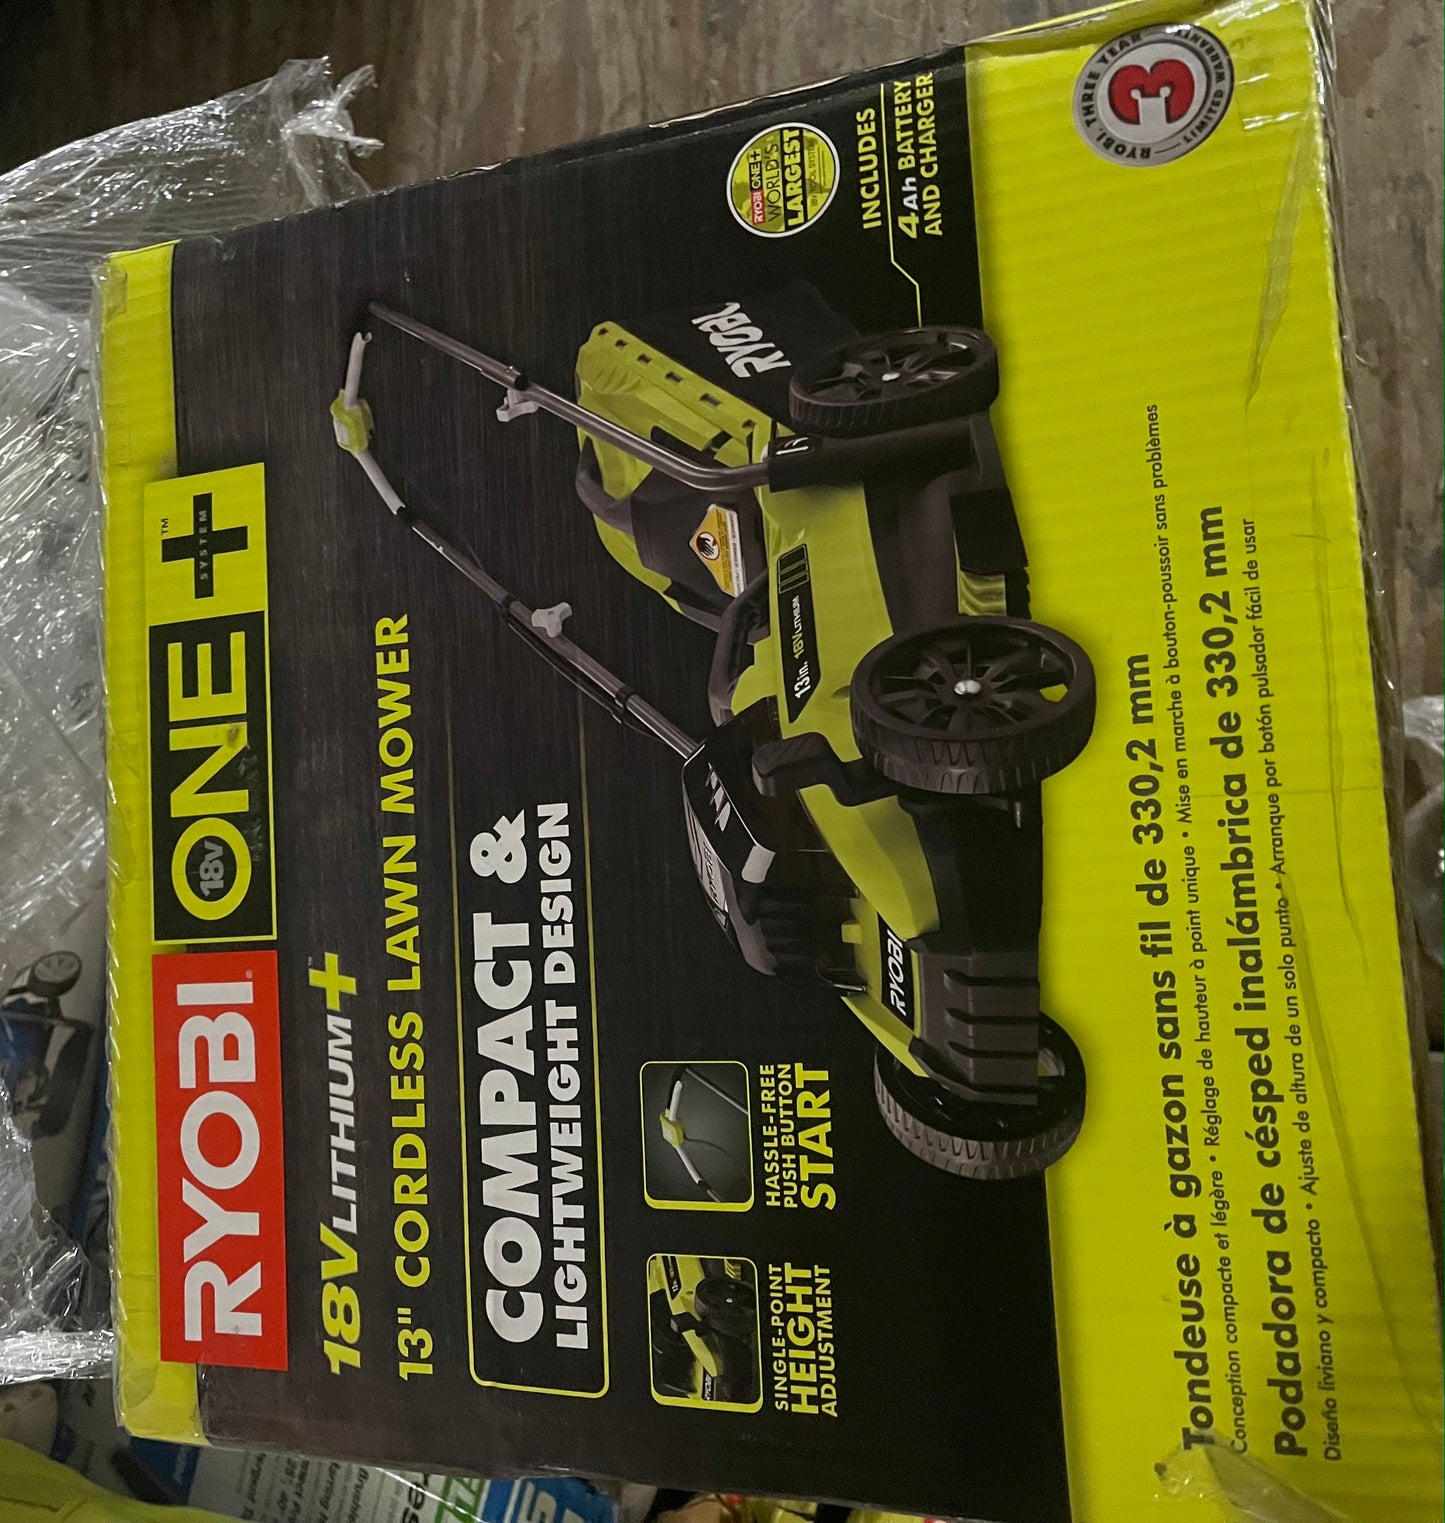 Ryobi 13 in. ONE+ 18V Lithium-Ion Cordless Battery Walk Behind Push Lawn Mower - 4.0 Ah Battery/Charger Included Damaged Box